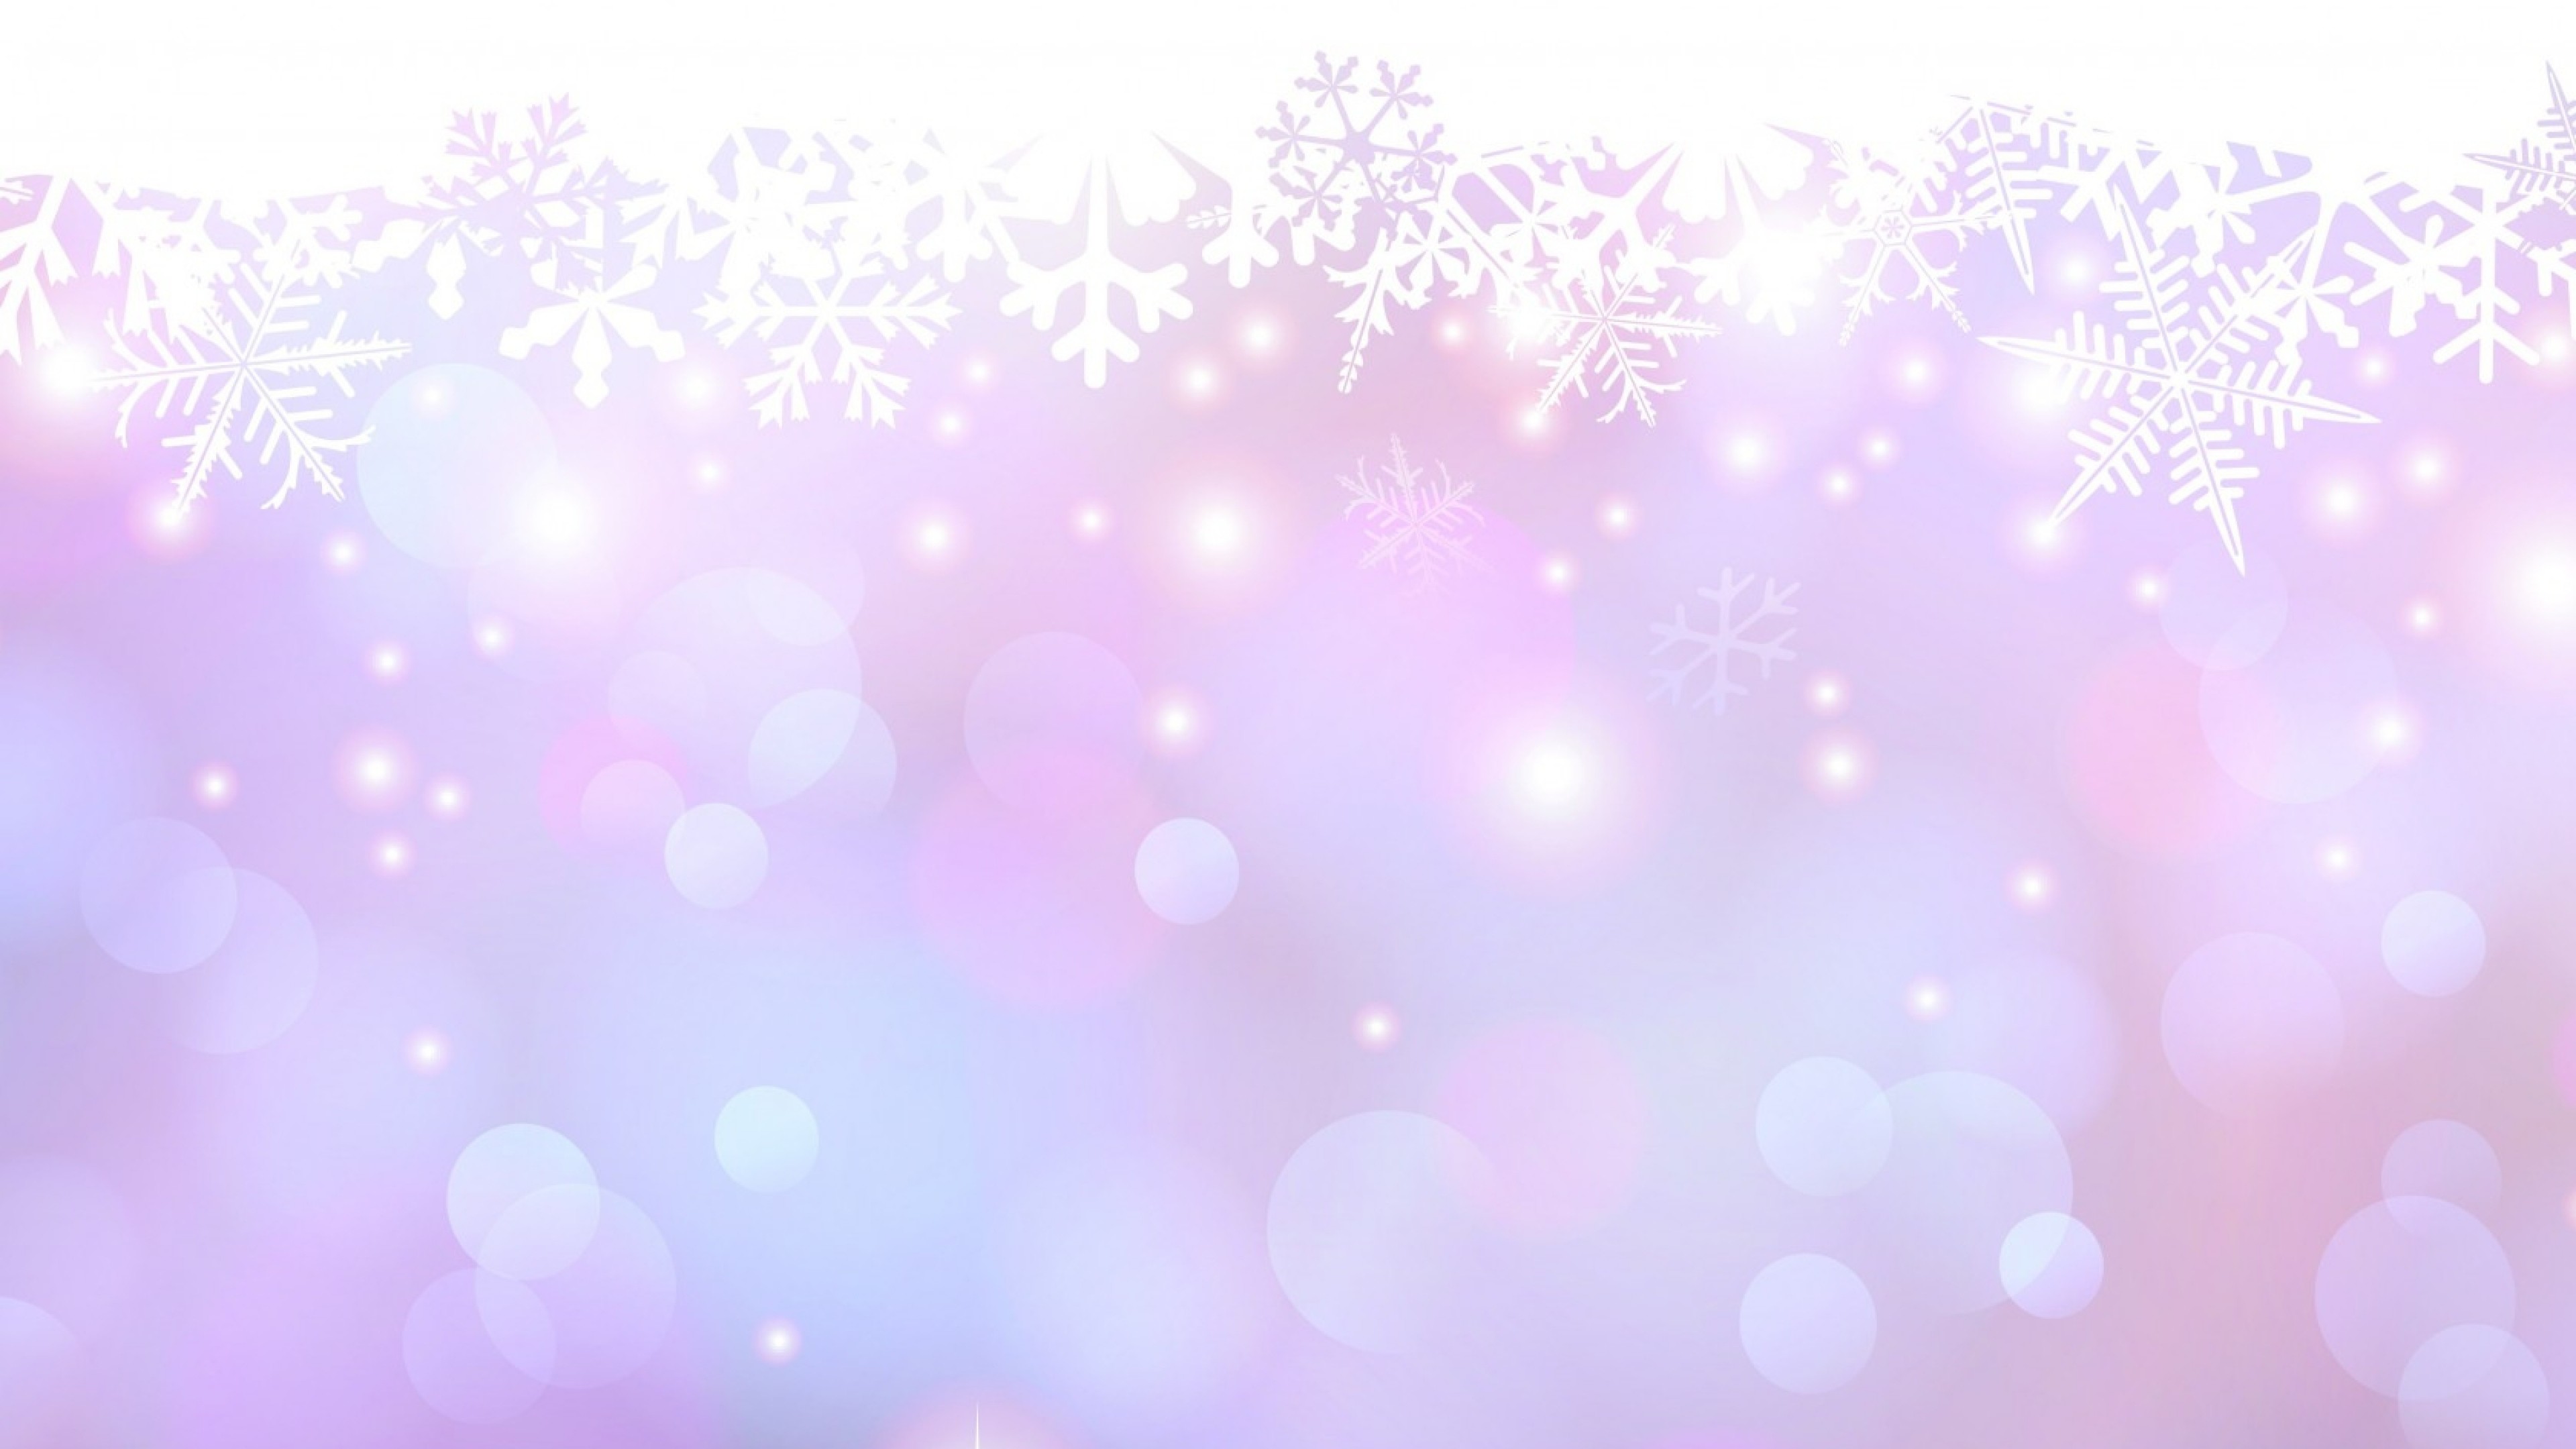 3840x2160 ... 23 Snowflakes Wallpapers, Snow Backgrounds, Pictures, Images .